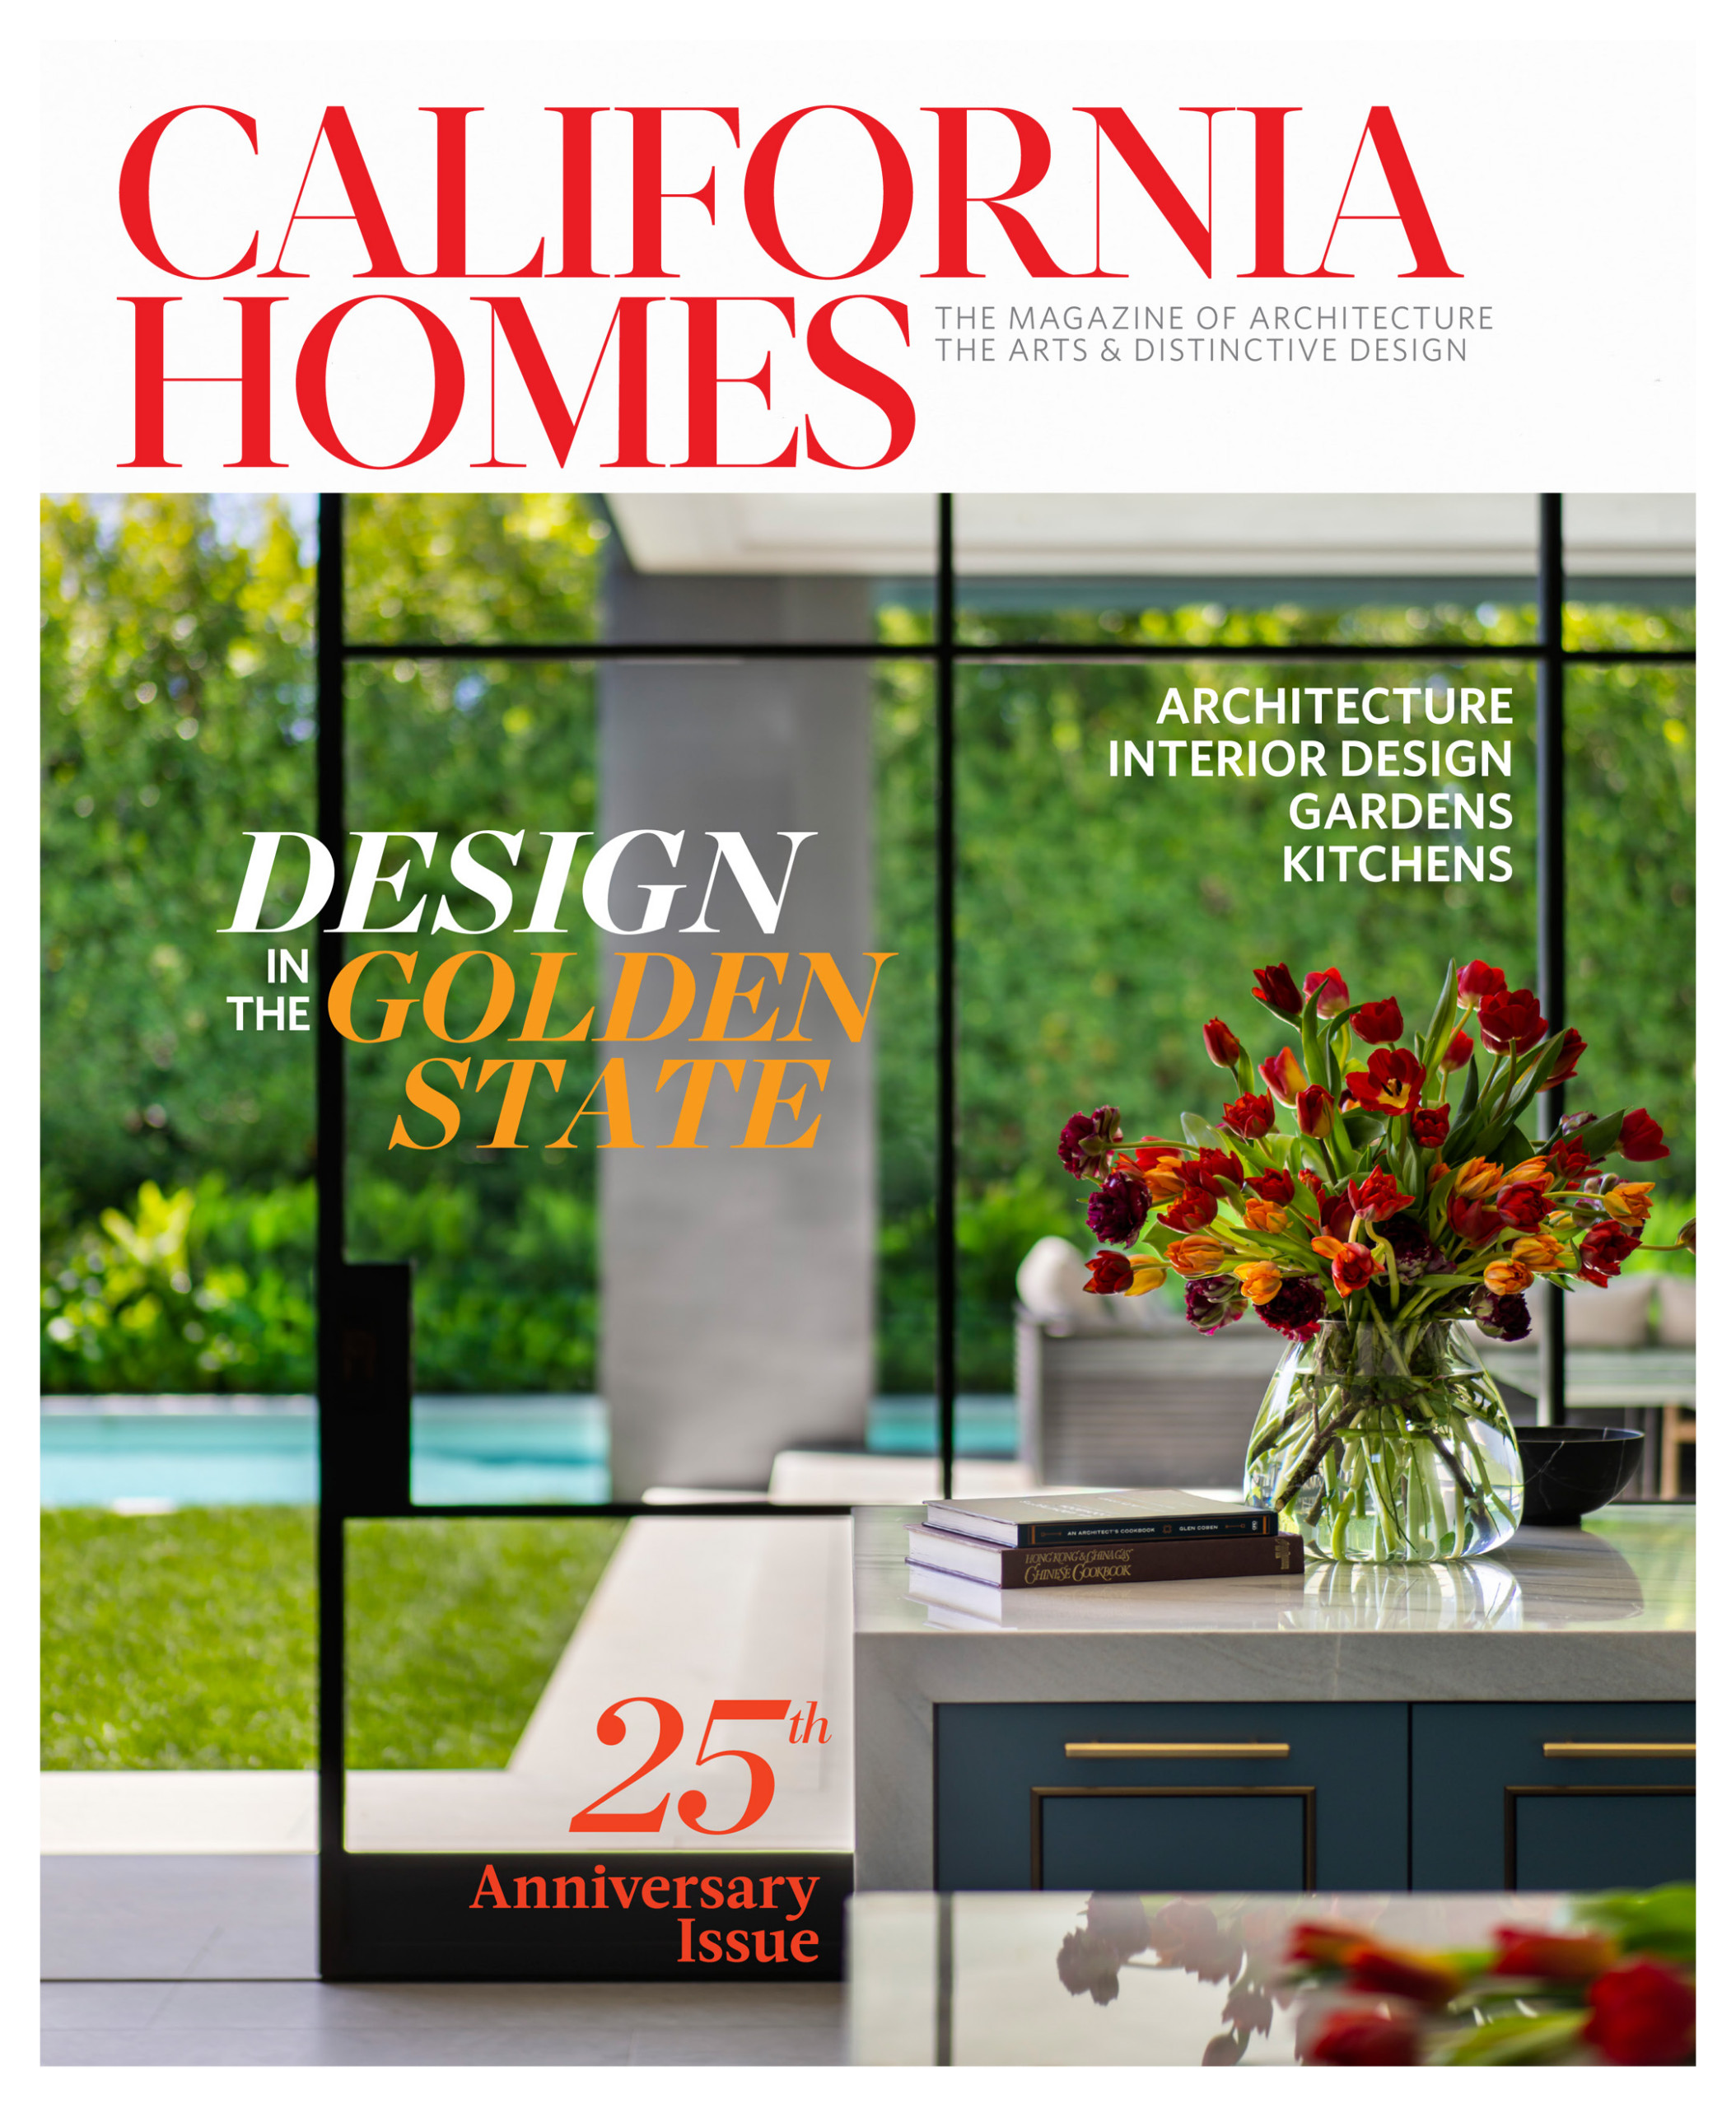 My Contemporary Kitchen Remodel Featured In California Homes Magazine - May 2022